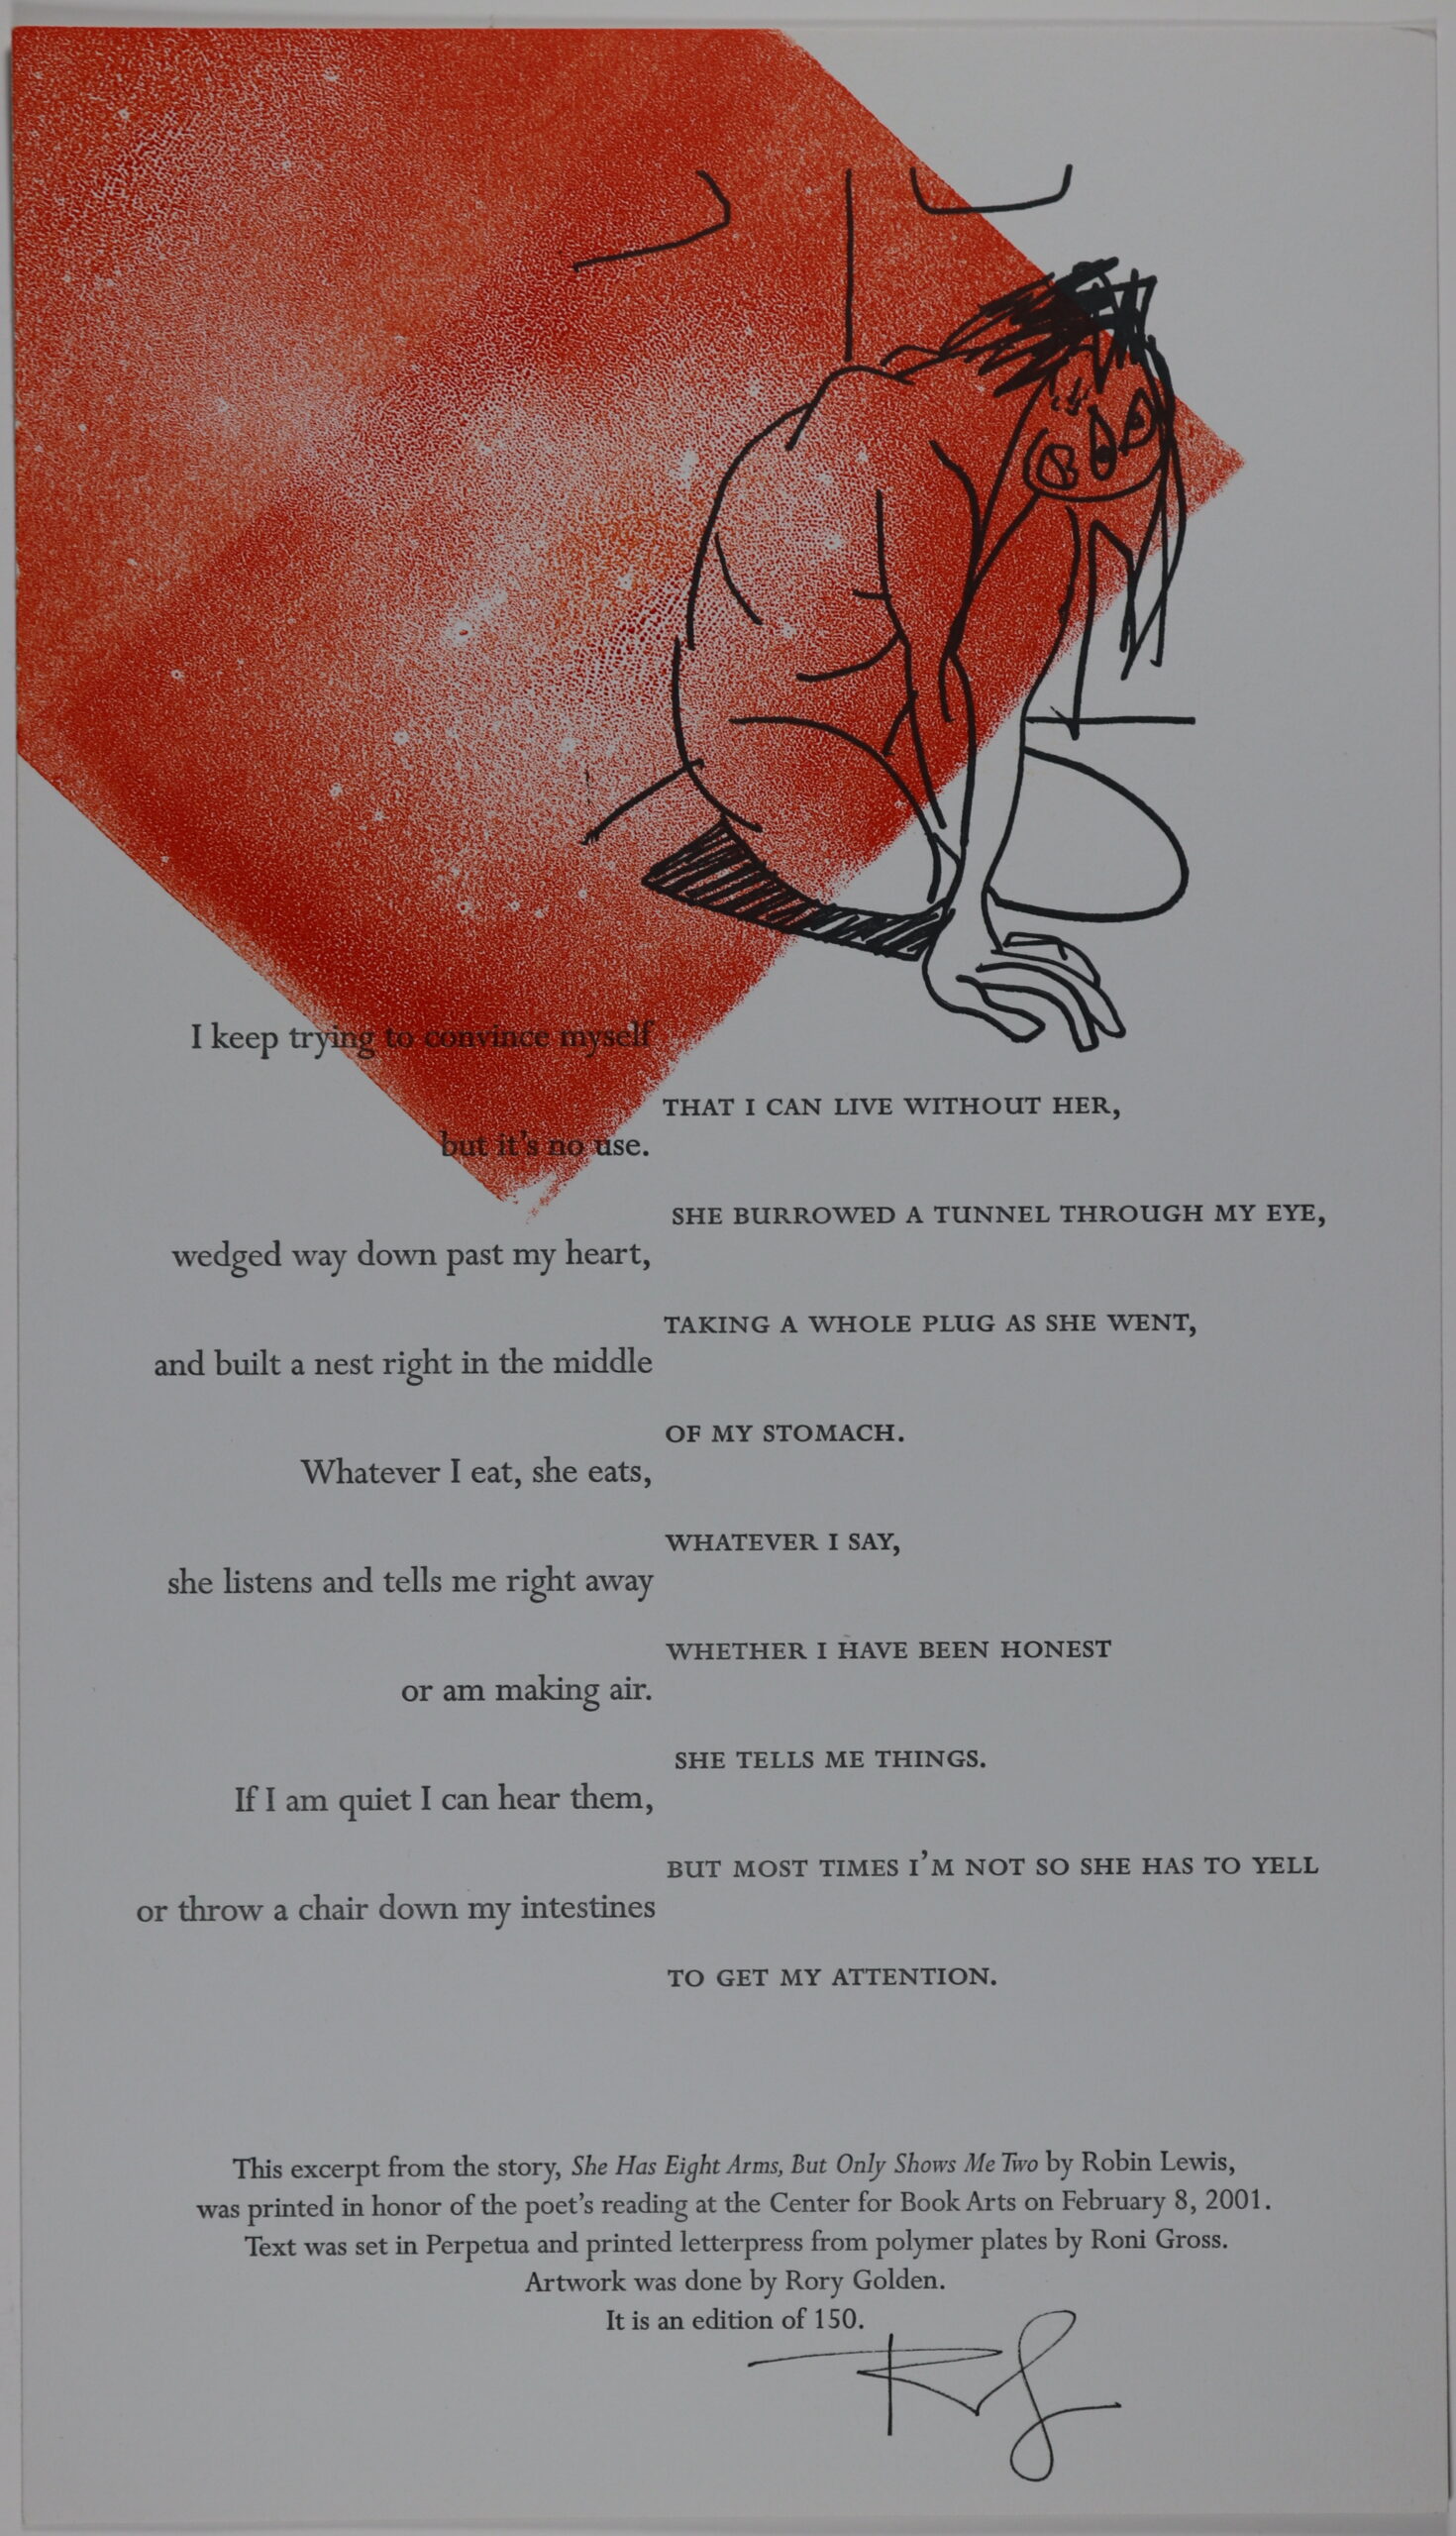 Broadside consists of a white background with a red drawn angled square above the piece, on top of that a black outlined drawing of a person bent on their knees with their eyes on top of one another, an open mouth, and their two arms crossed in front of them. Their hair is drawn as messy lines. The text is below the image in black colored font.